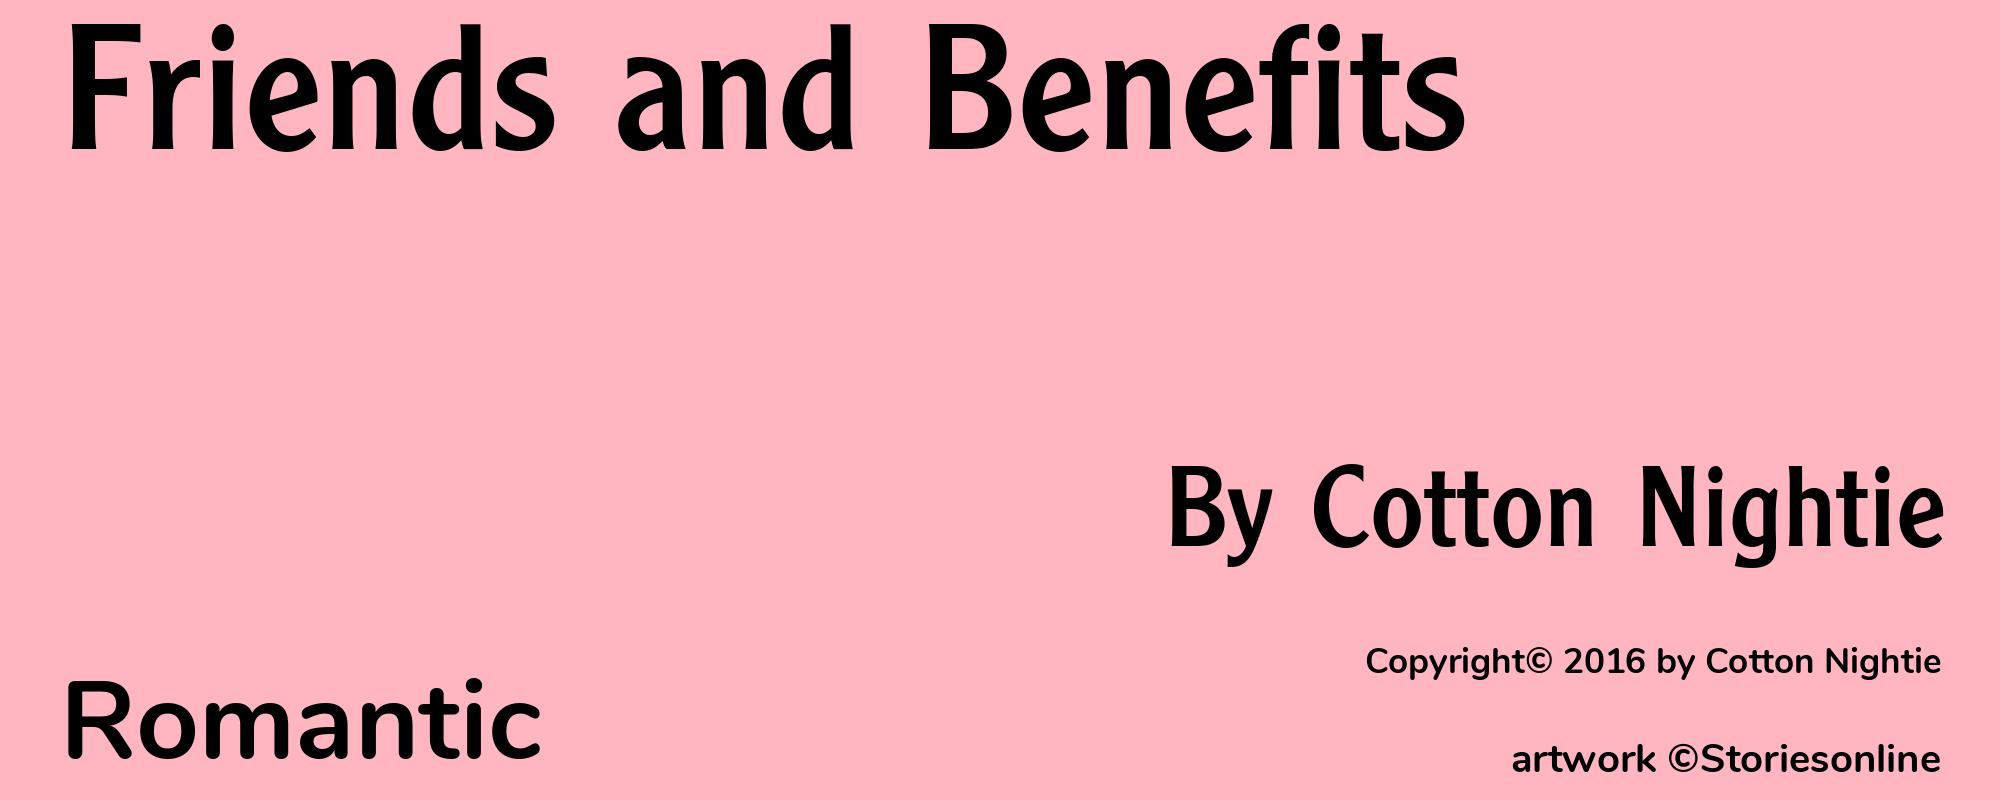 Friends and Benefits - Cover